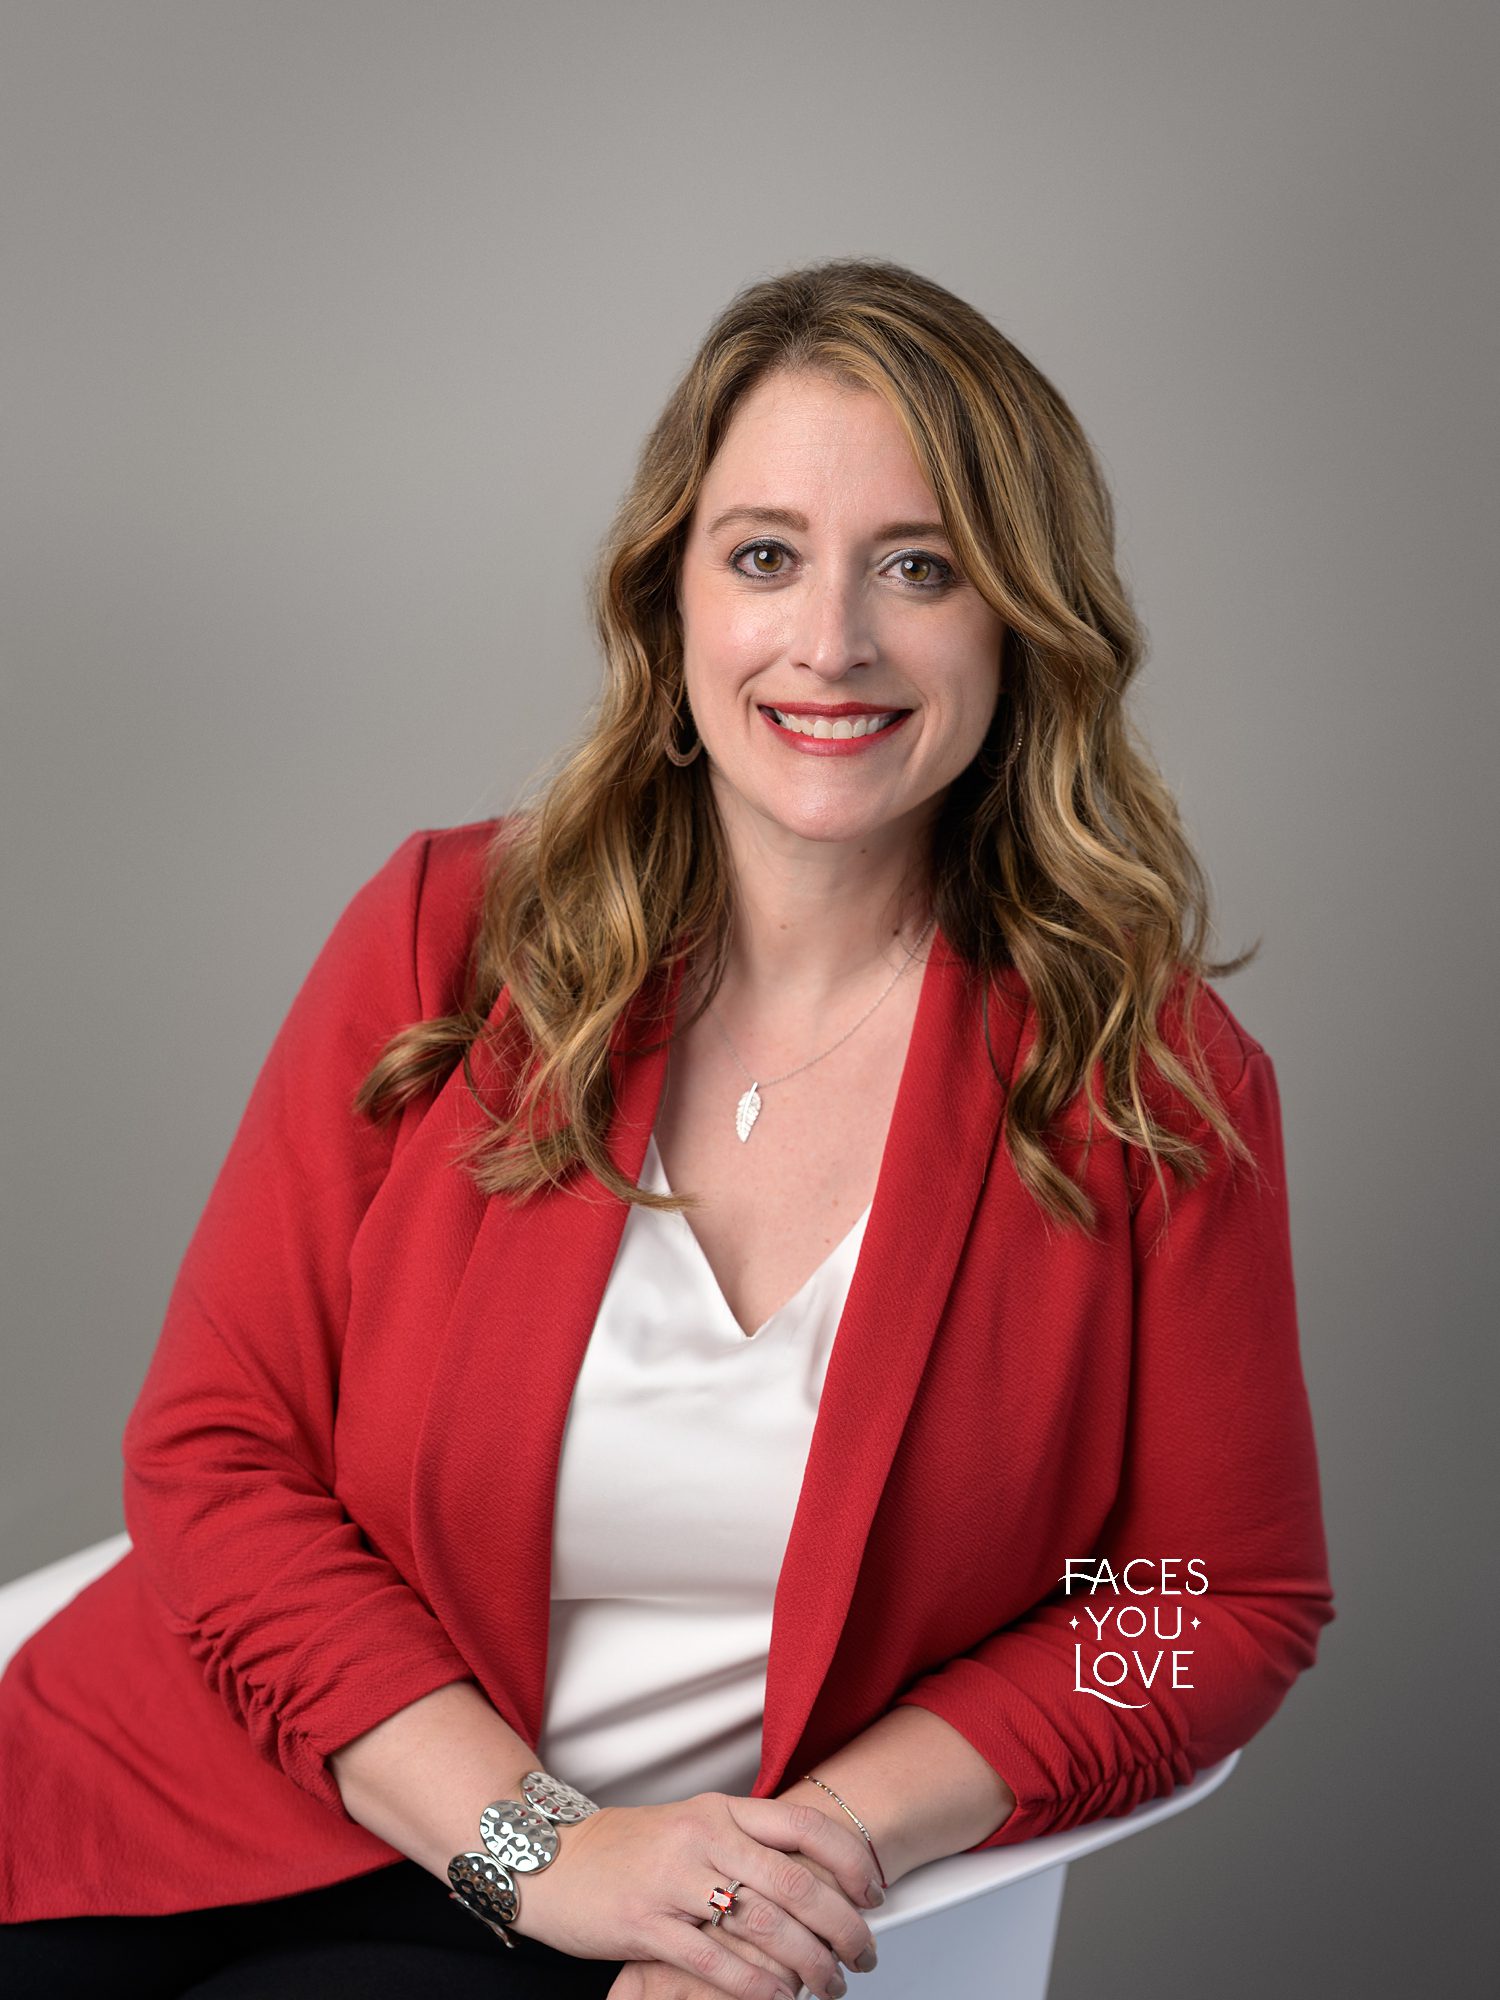 Professional female headshot, photographed on a gray background. She's sitting in a white chair and wearing a red blazer. Photographed at Kansas City headshot studio Faces You Love Photography.